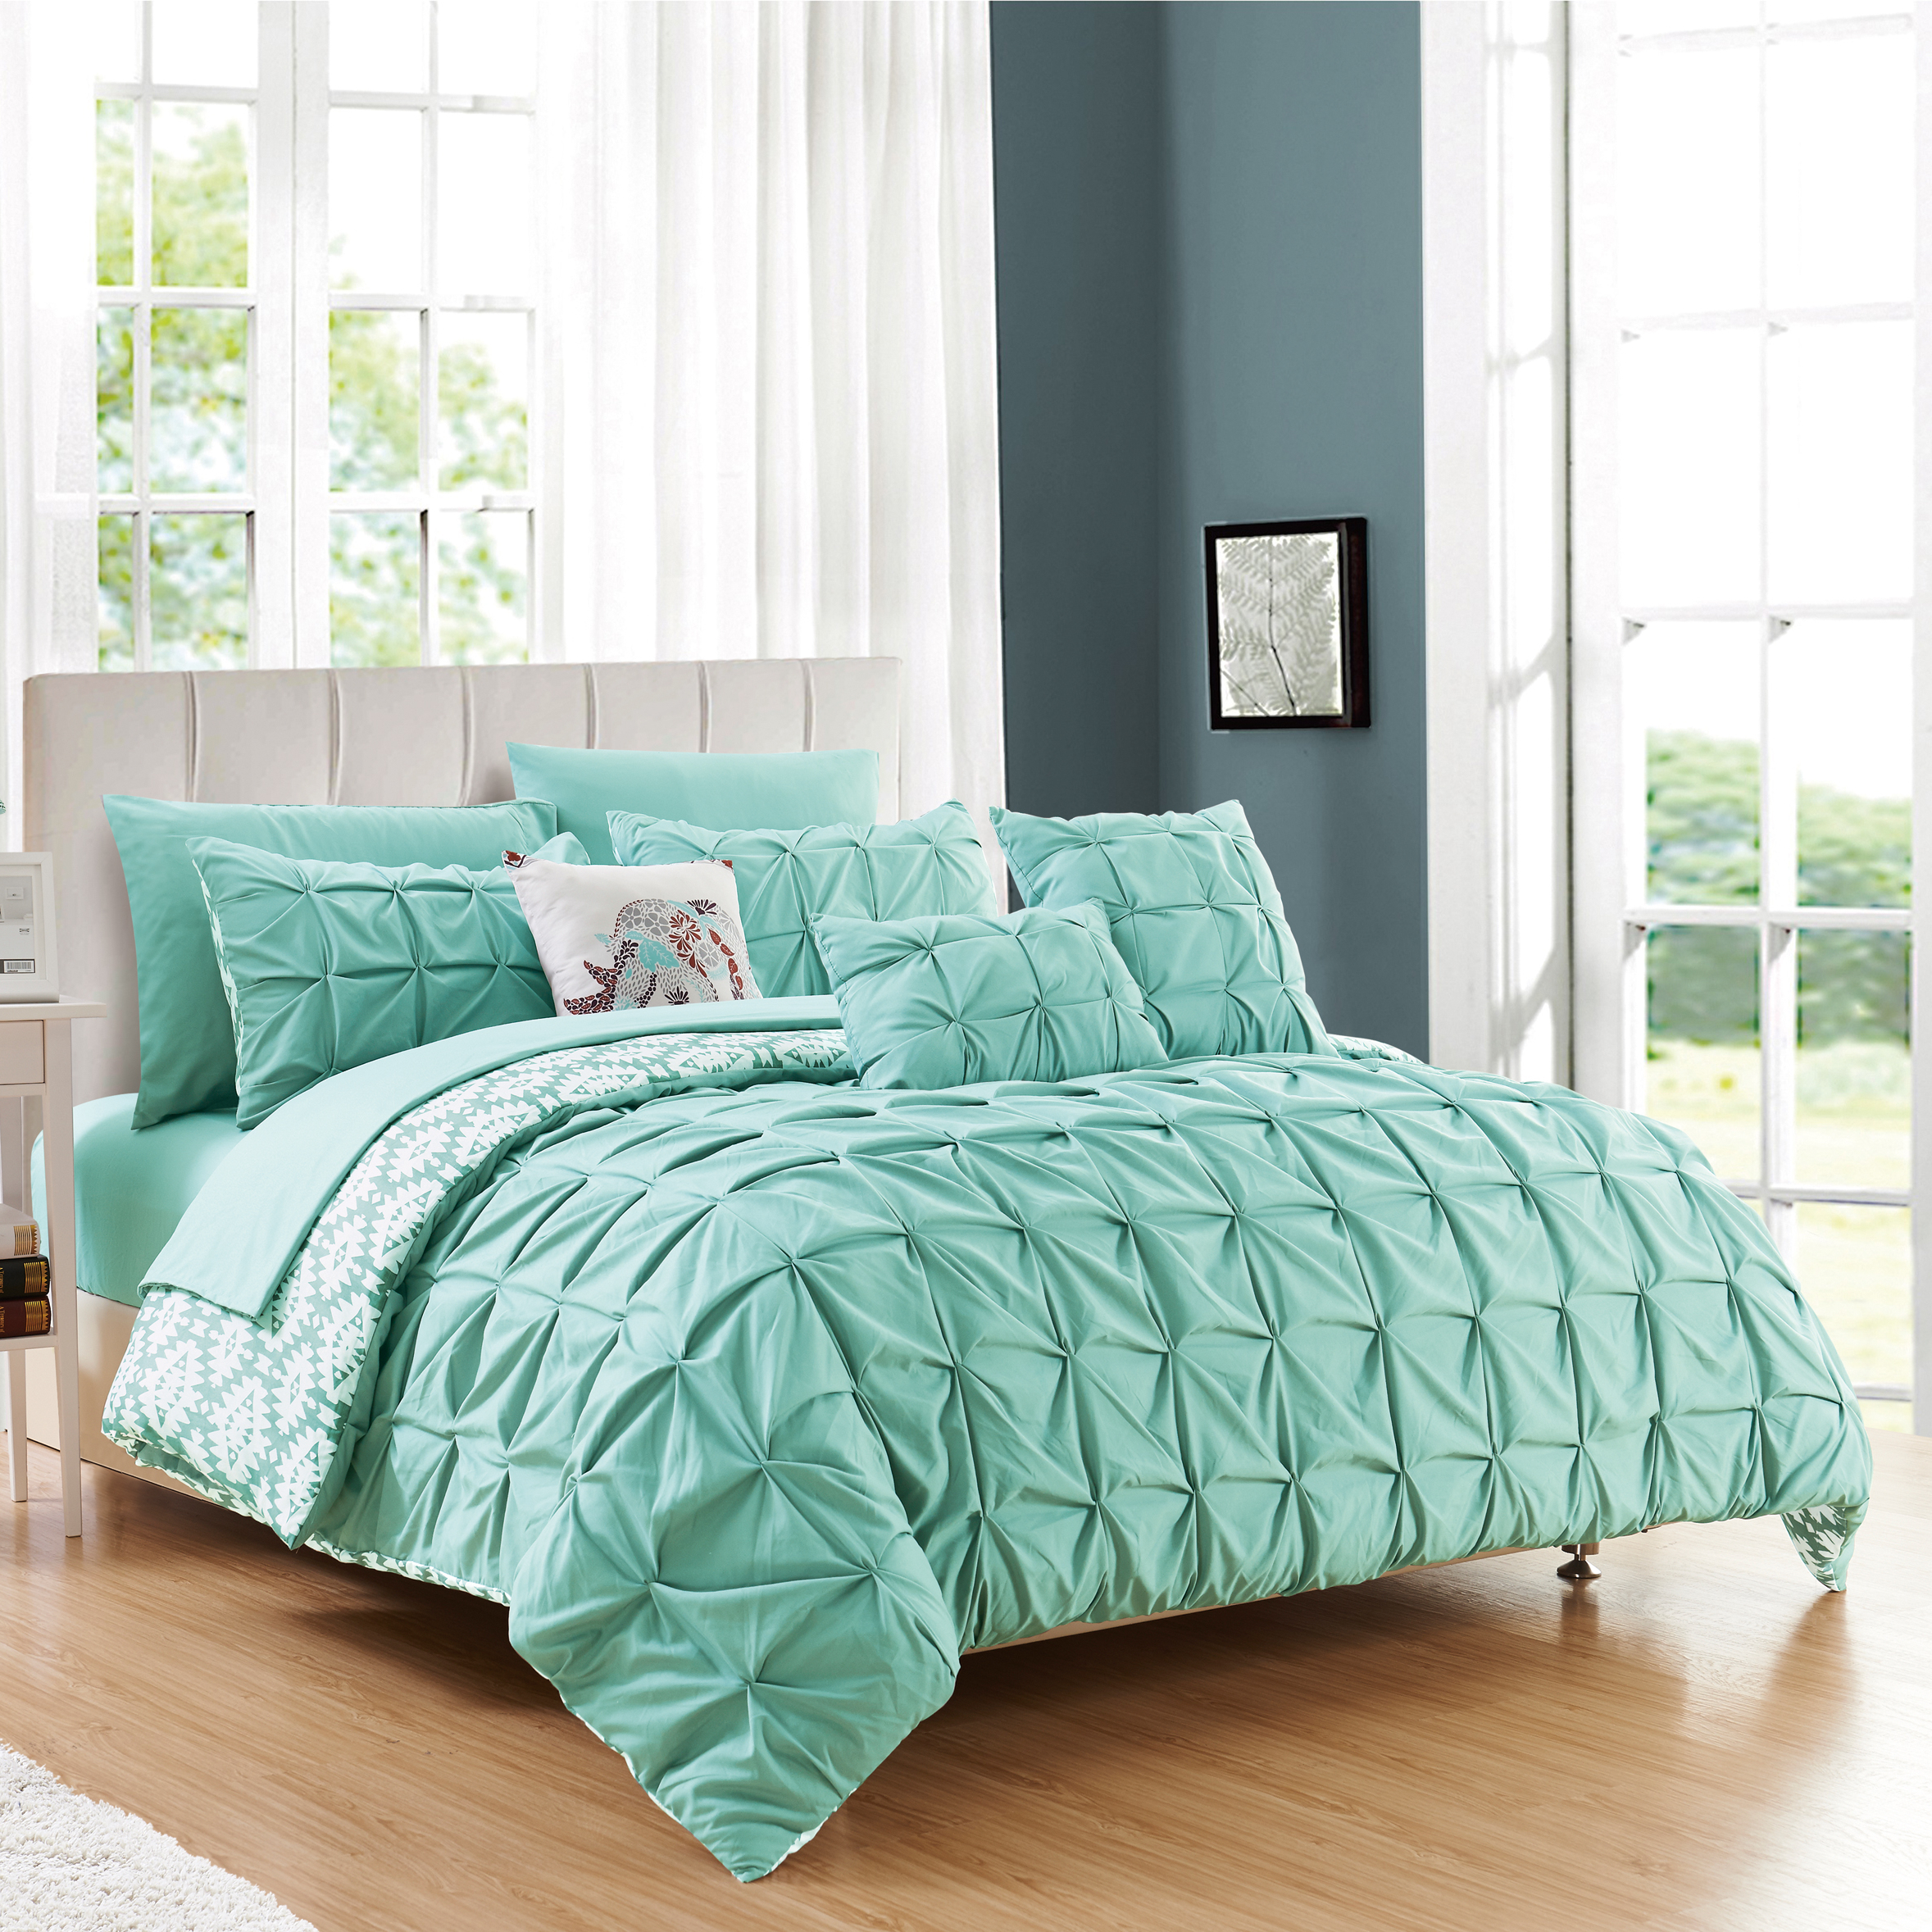 Rahab 10 Or 8 Piece Reversible Comforter Set Complete Bed In A Bag Pintuck Pleated And Aztec Inspired - Aqua, Twin